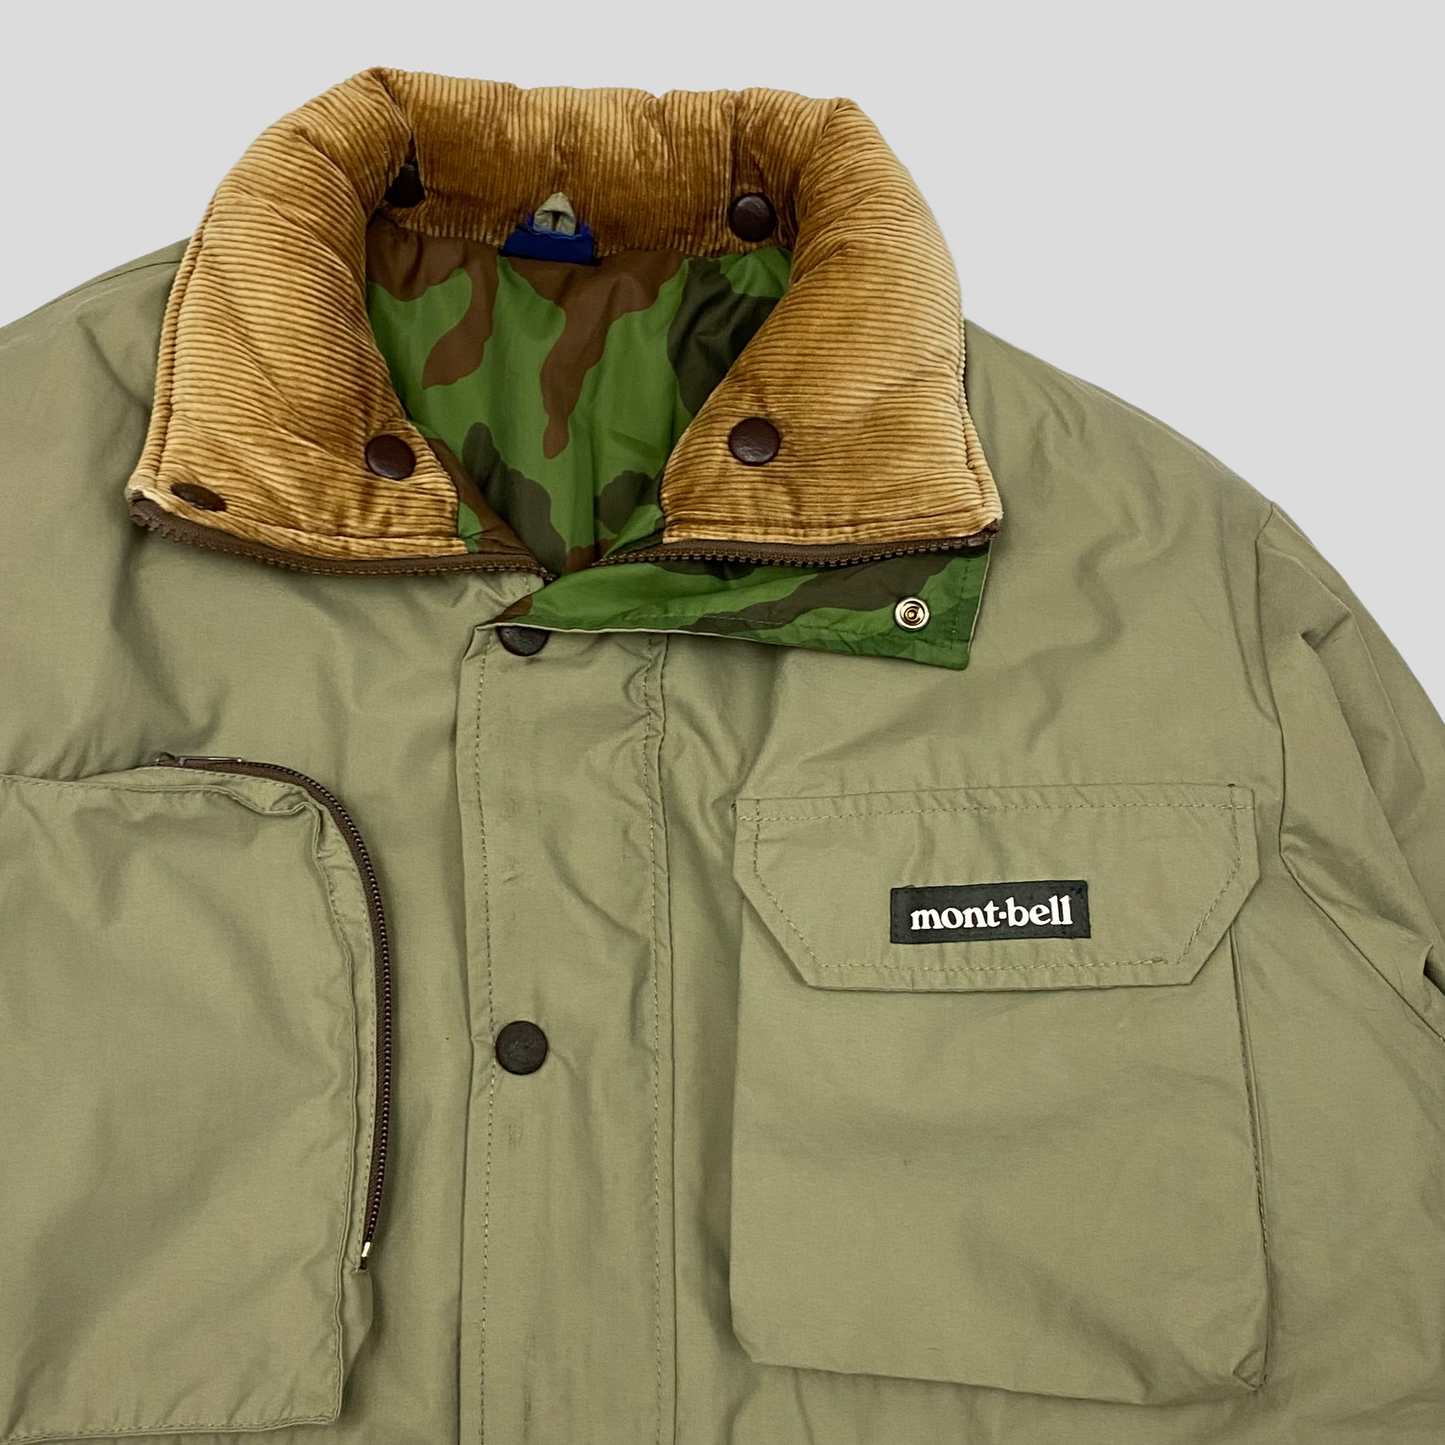 Mont-bell 90’s Tactical Reversible Fisherman’s Puffer Jacket - M